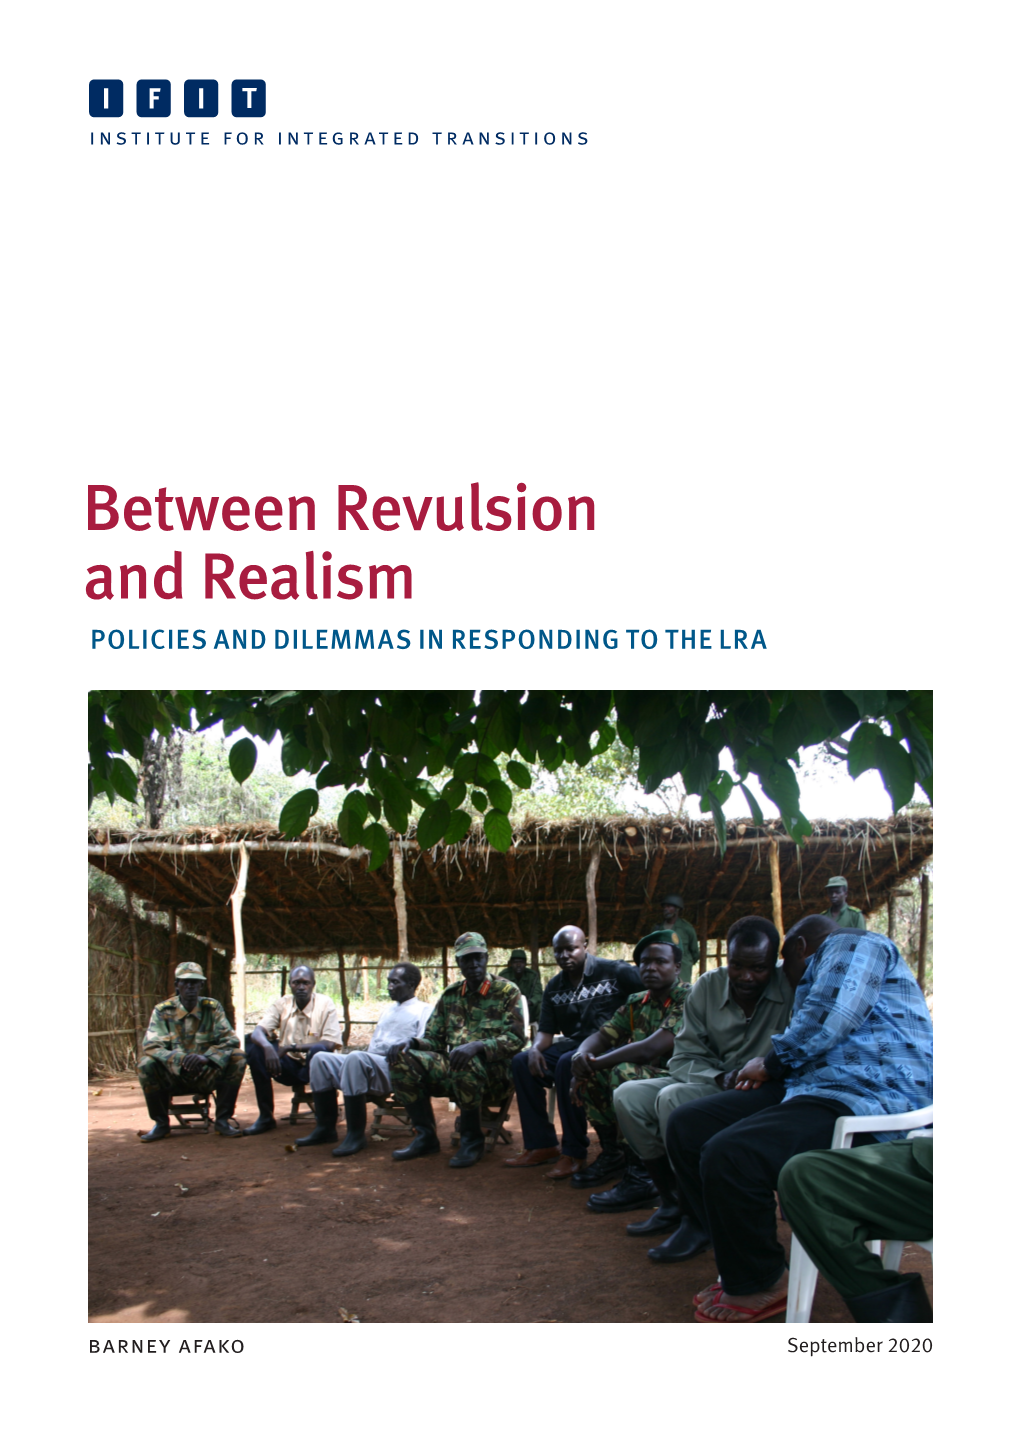 Between Revulsion and Realism: Policies and Dilemmas Responding to The